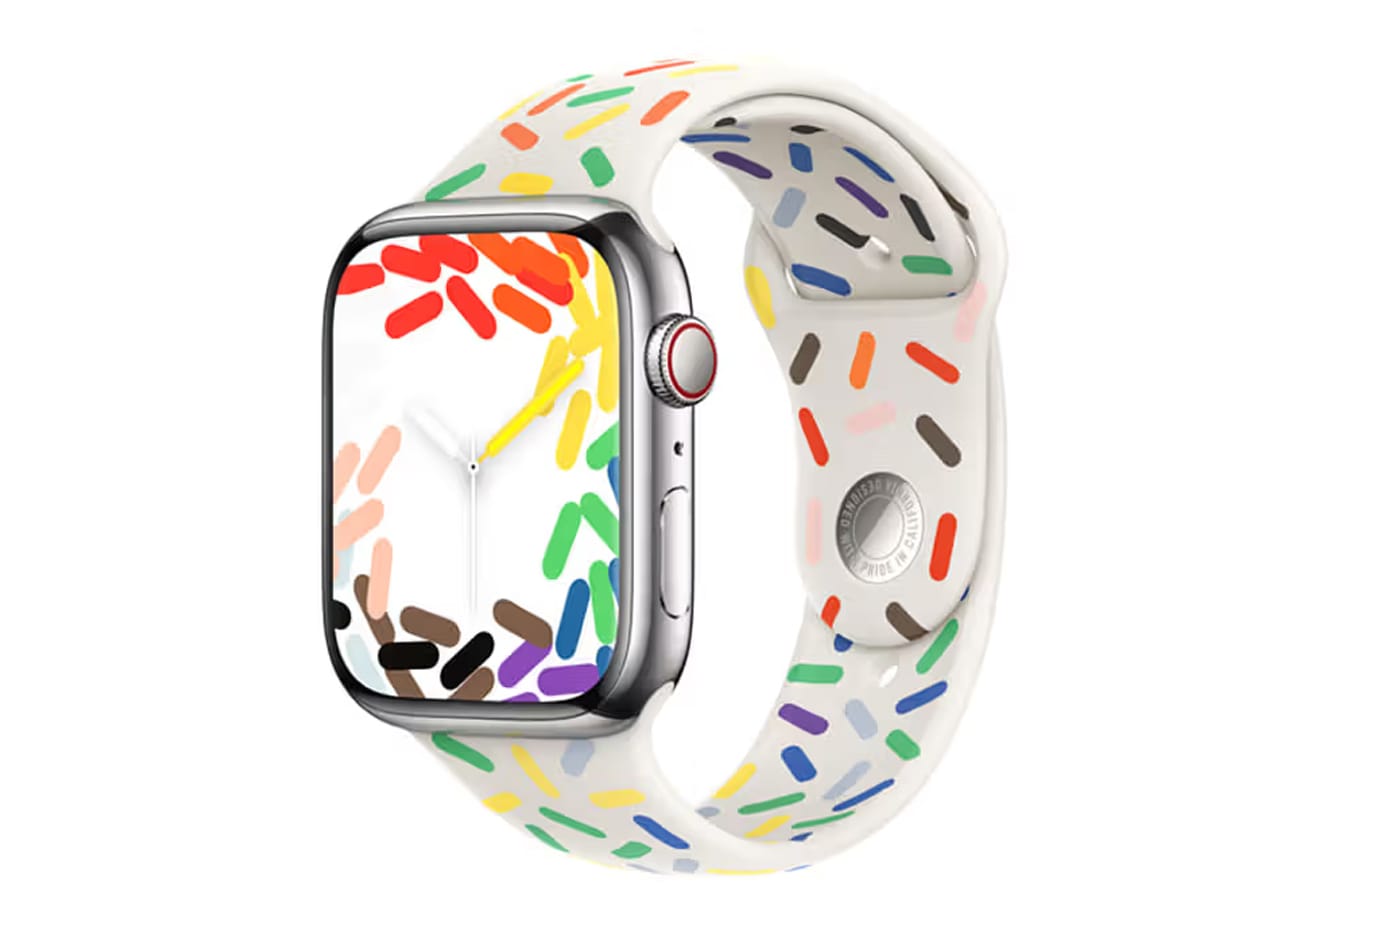 Apple Reveals Pride Apple Watch Band and Face | Hypebeast